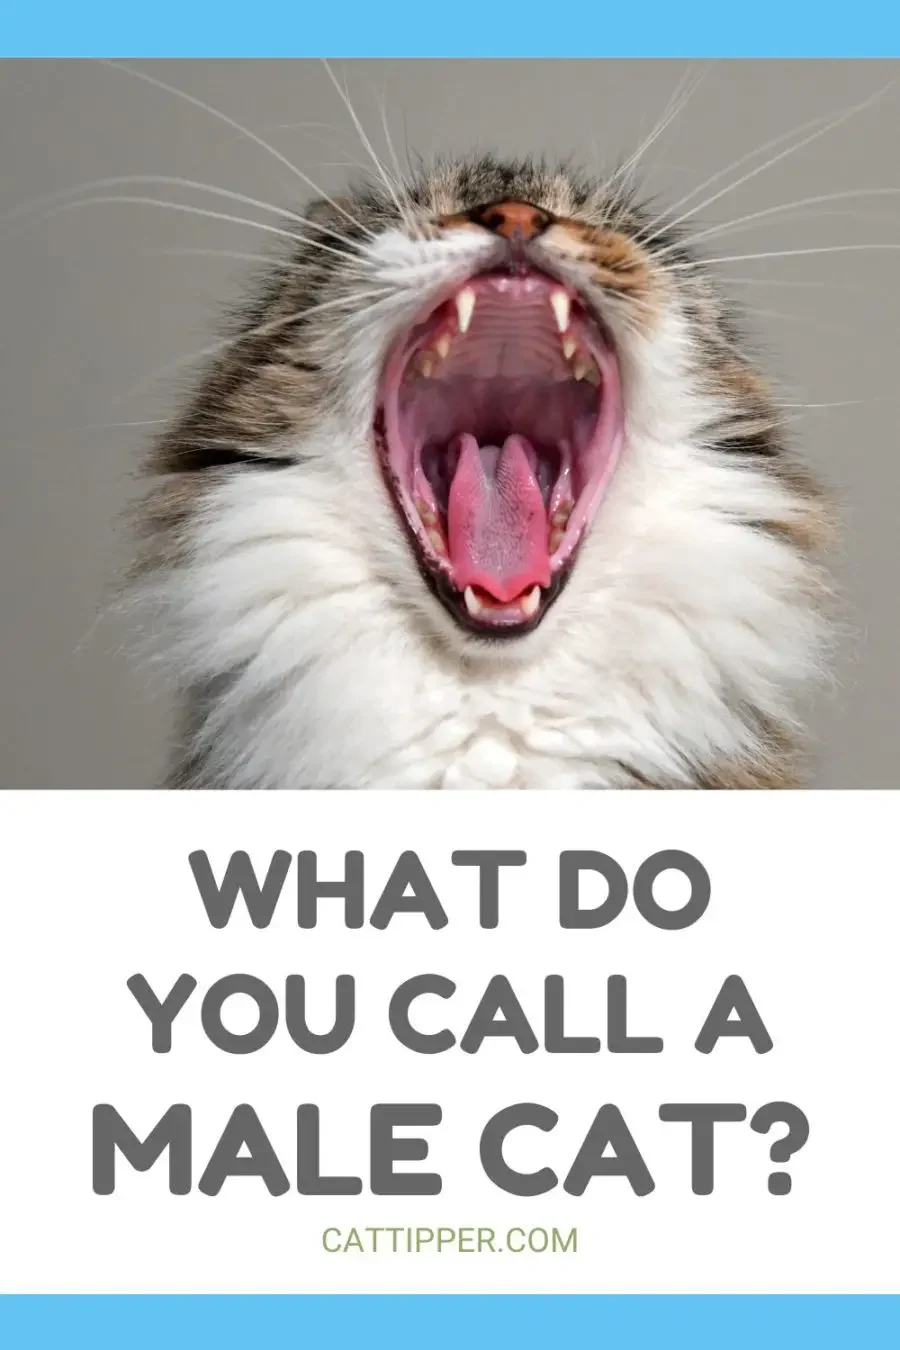 What Do You Call a Male Cat?